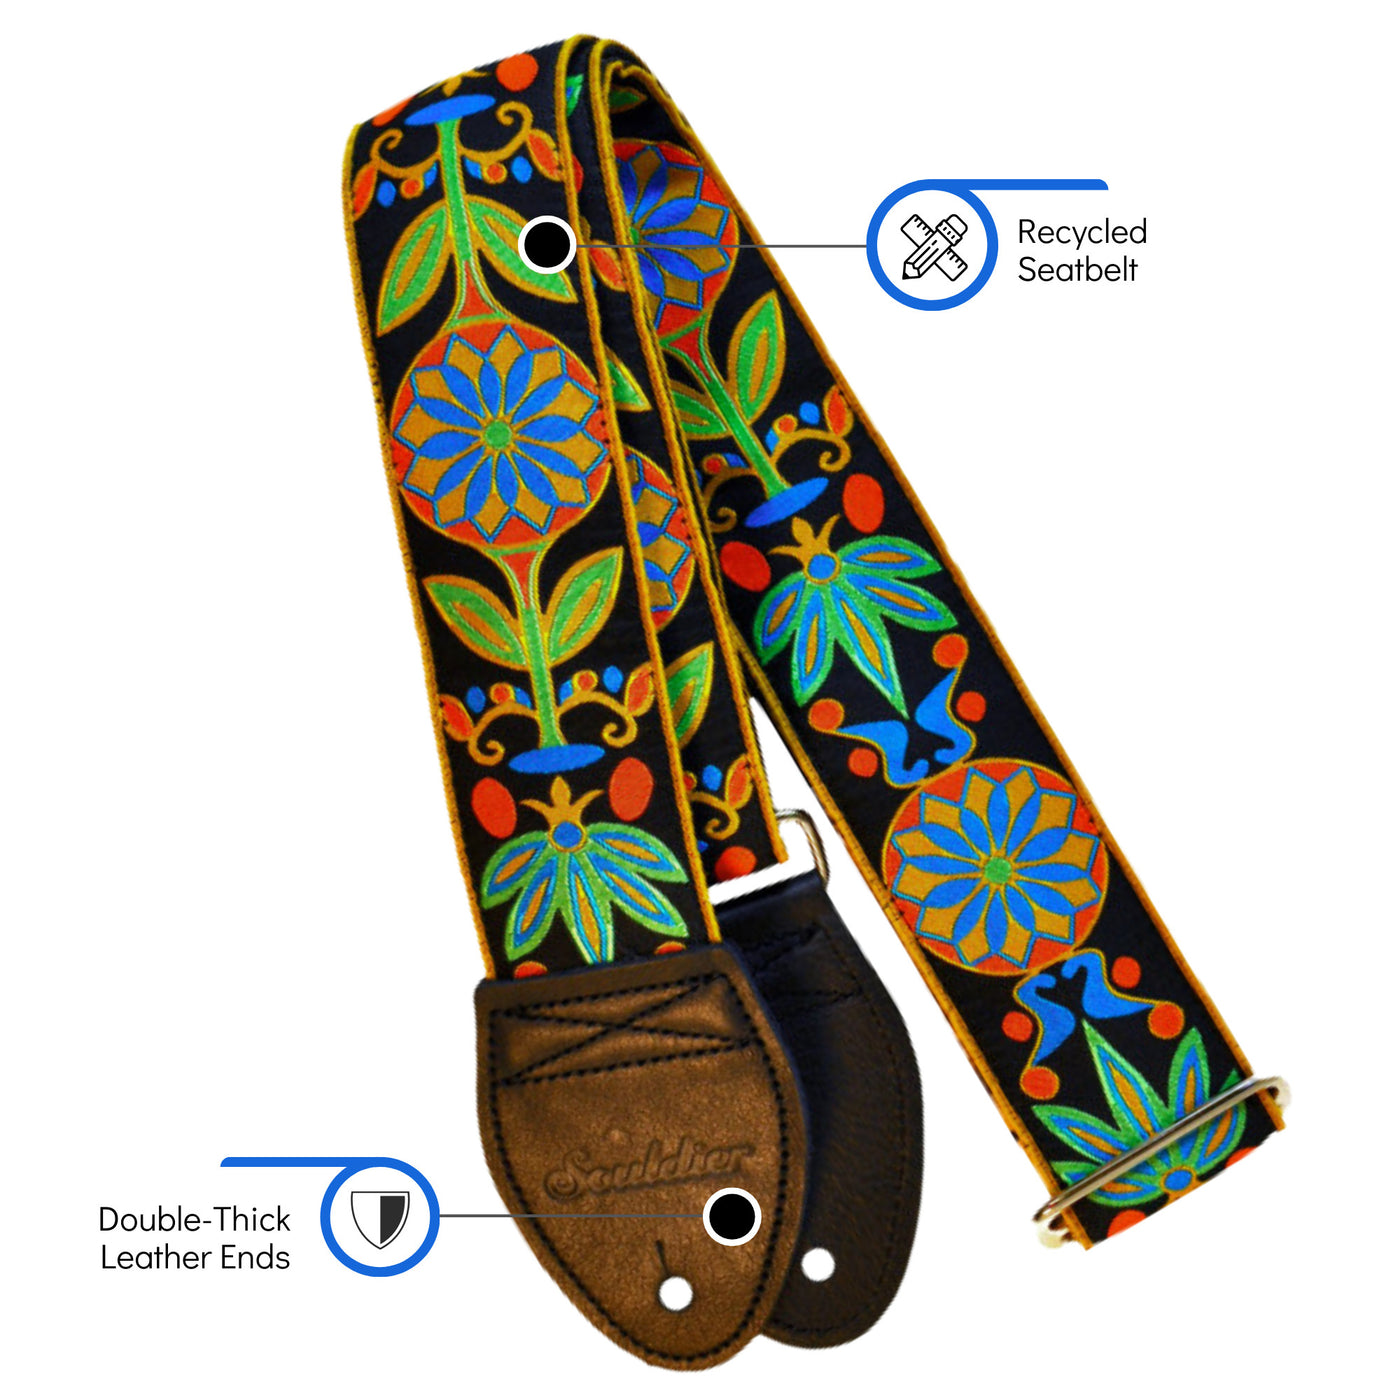 Souldier GS0086BK02BK - Handmade Seatbelt Guitar Strap for Bass, Electric or Acoustic Guitar, 2 Inches Wide and Adjustable Length from 30" to 63"  Made in the USA, Daisy, Blue